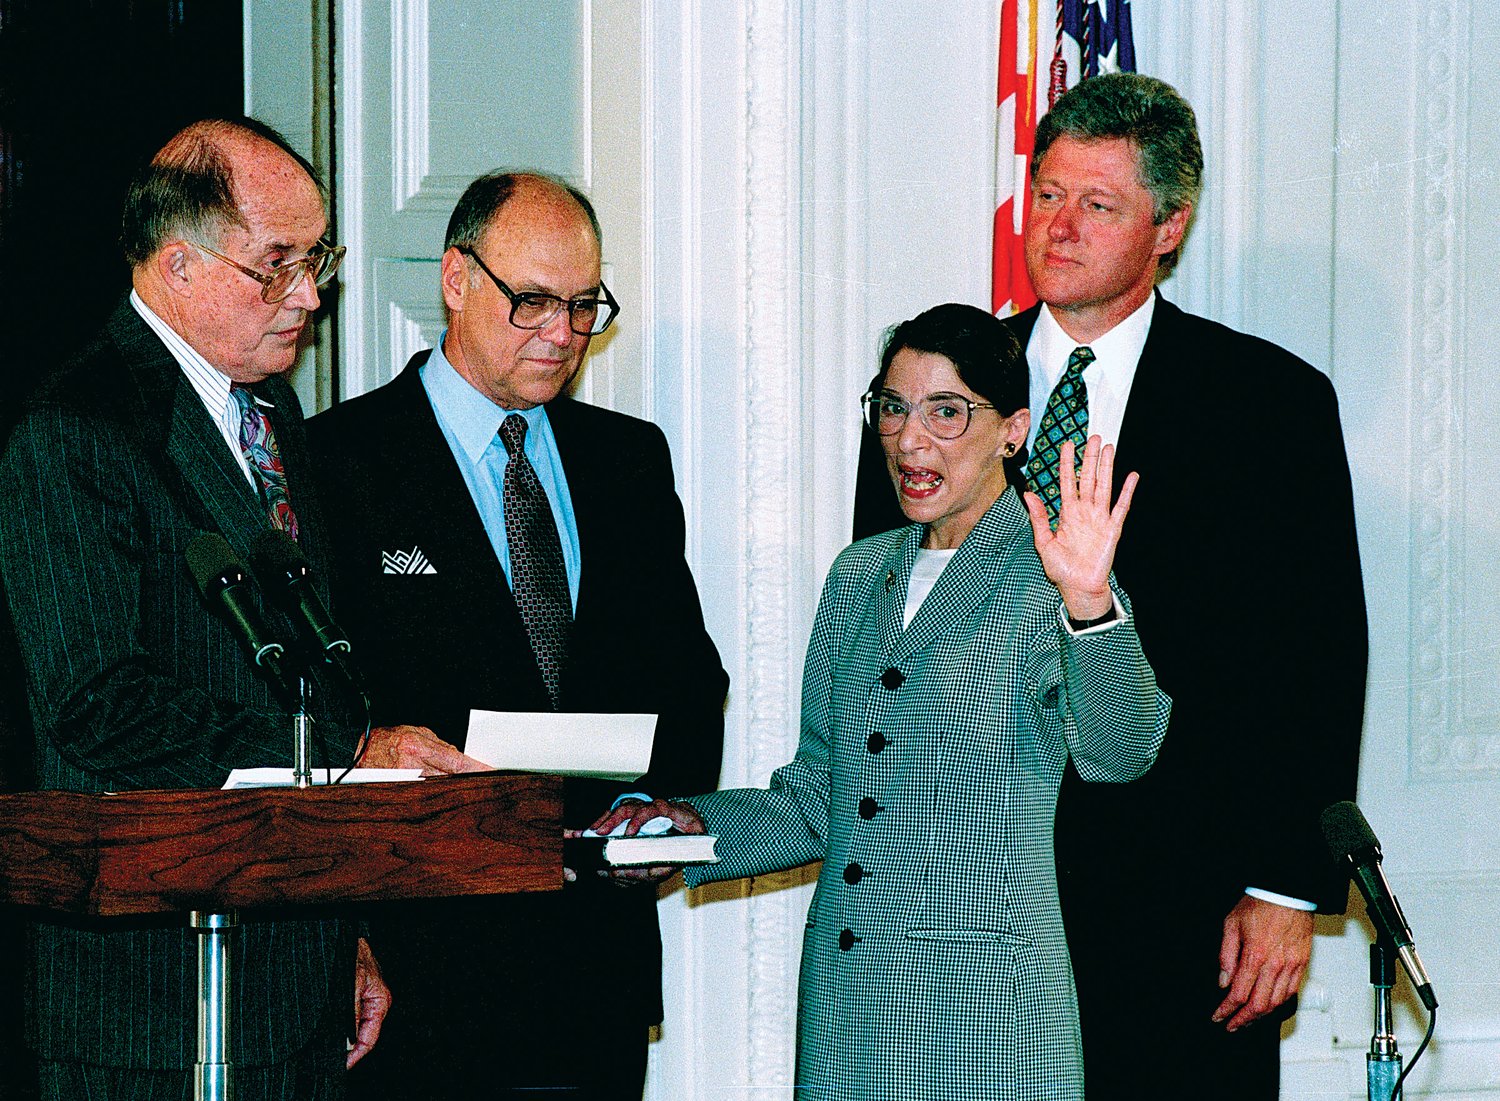 Chief Justice William H. Renquist administers the oath of office at the White House to incoming Justice Ruth Bader Ginsberg standing together with her husband Martin Ginsberg, holding the bible, and then President Bill Clinton. The White House, 1993.